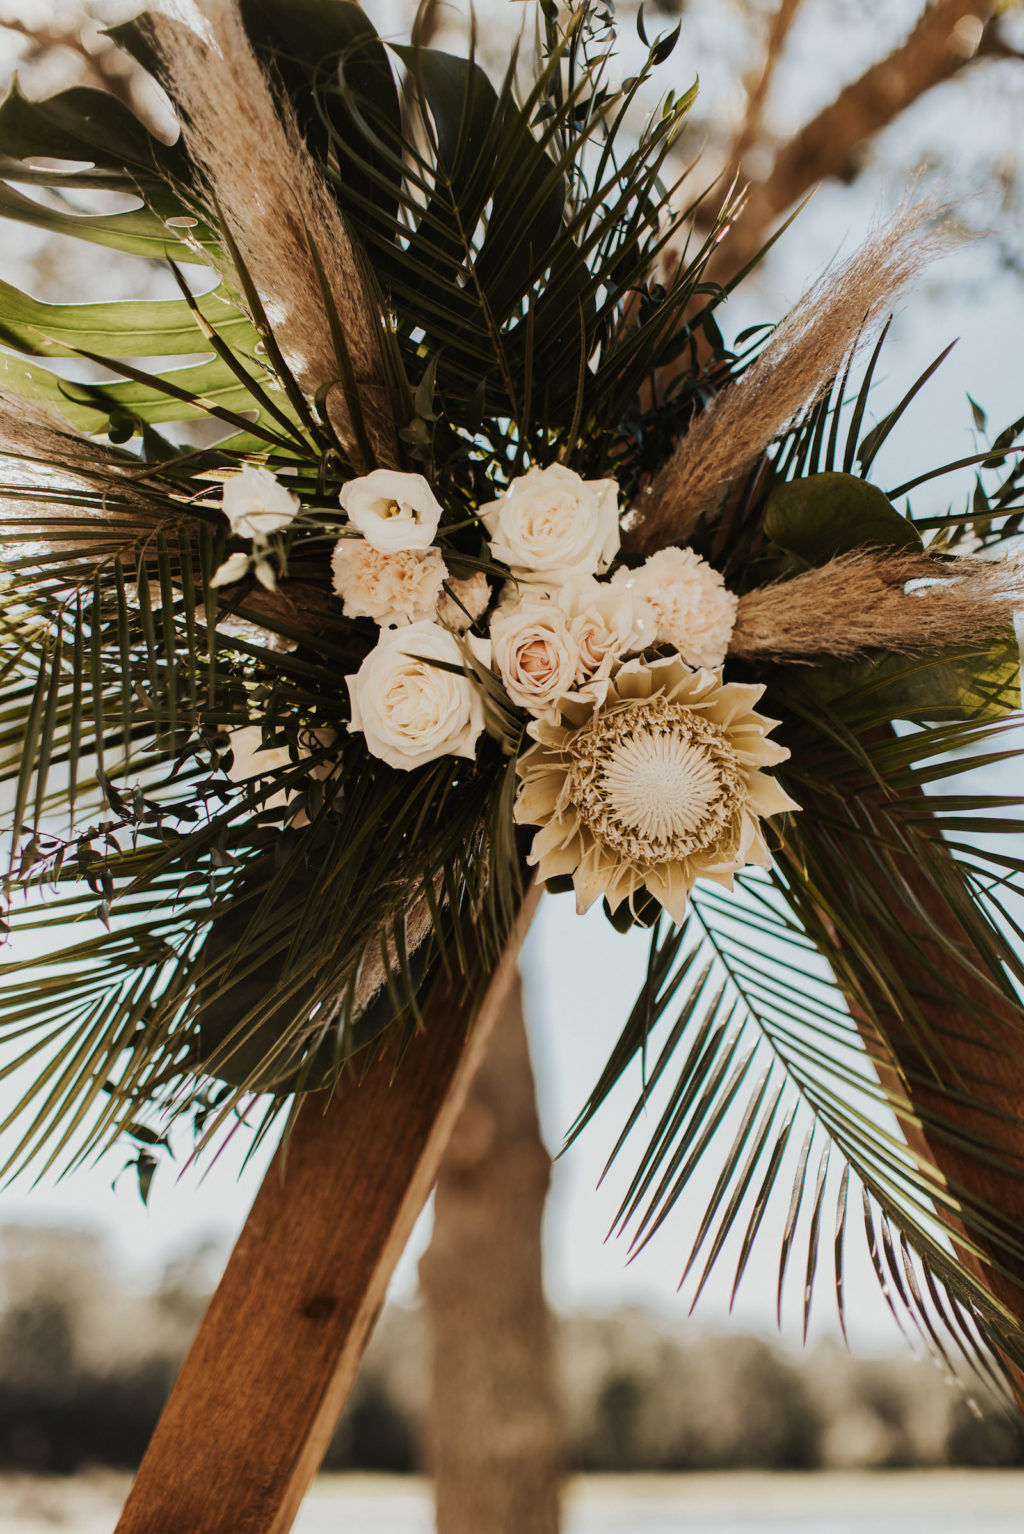 Timeless Wedding Ceremony Decor, Neutral Floral Arrangement, Ivory Roses, Palm Fronds, Monstera Palm Leaves, King Protea Flowers